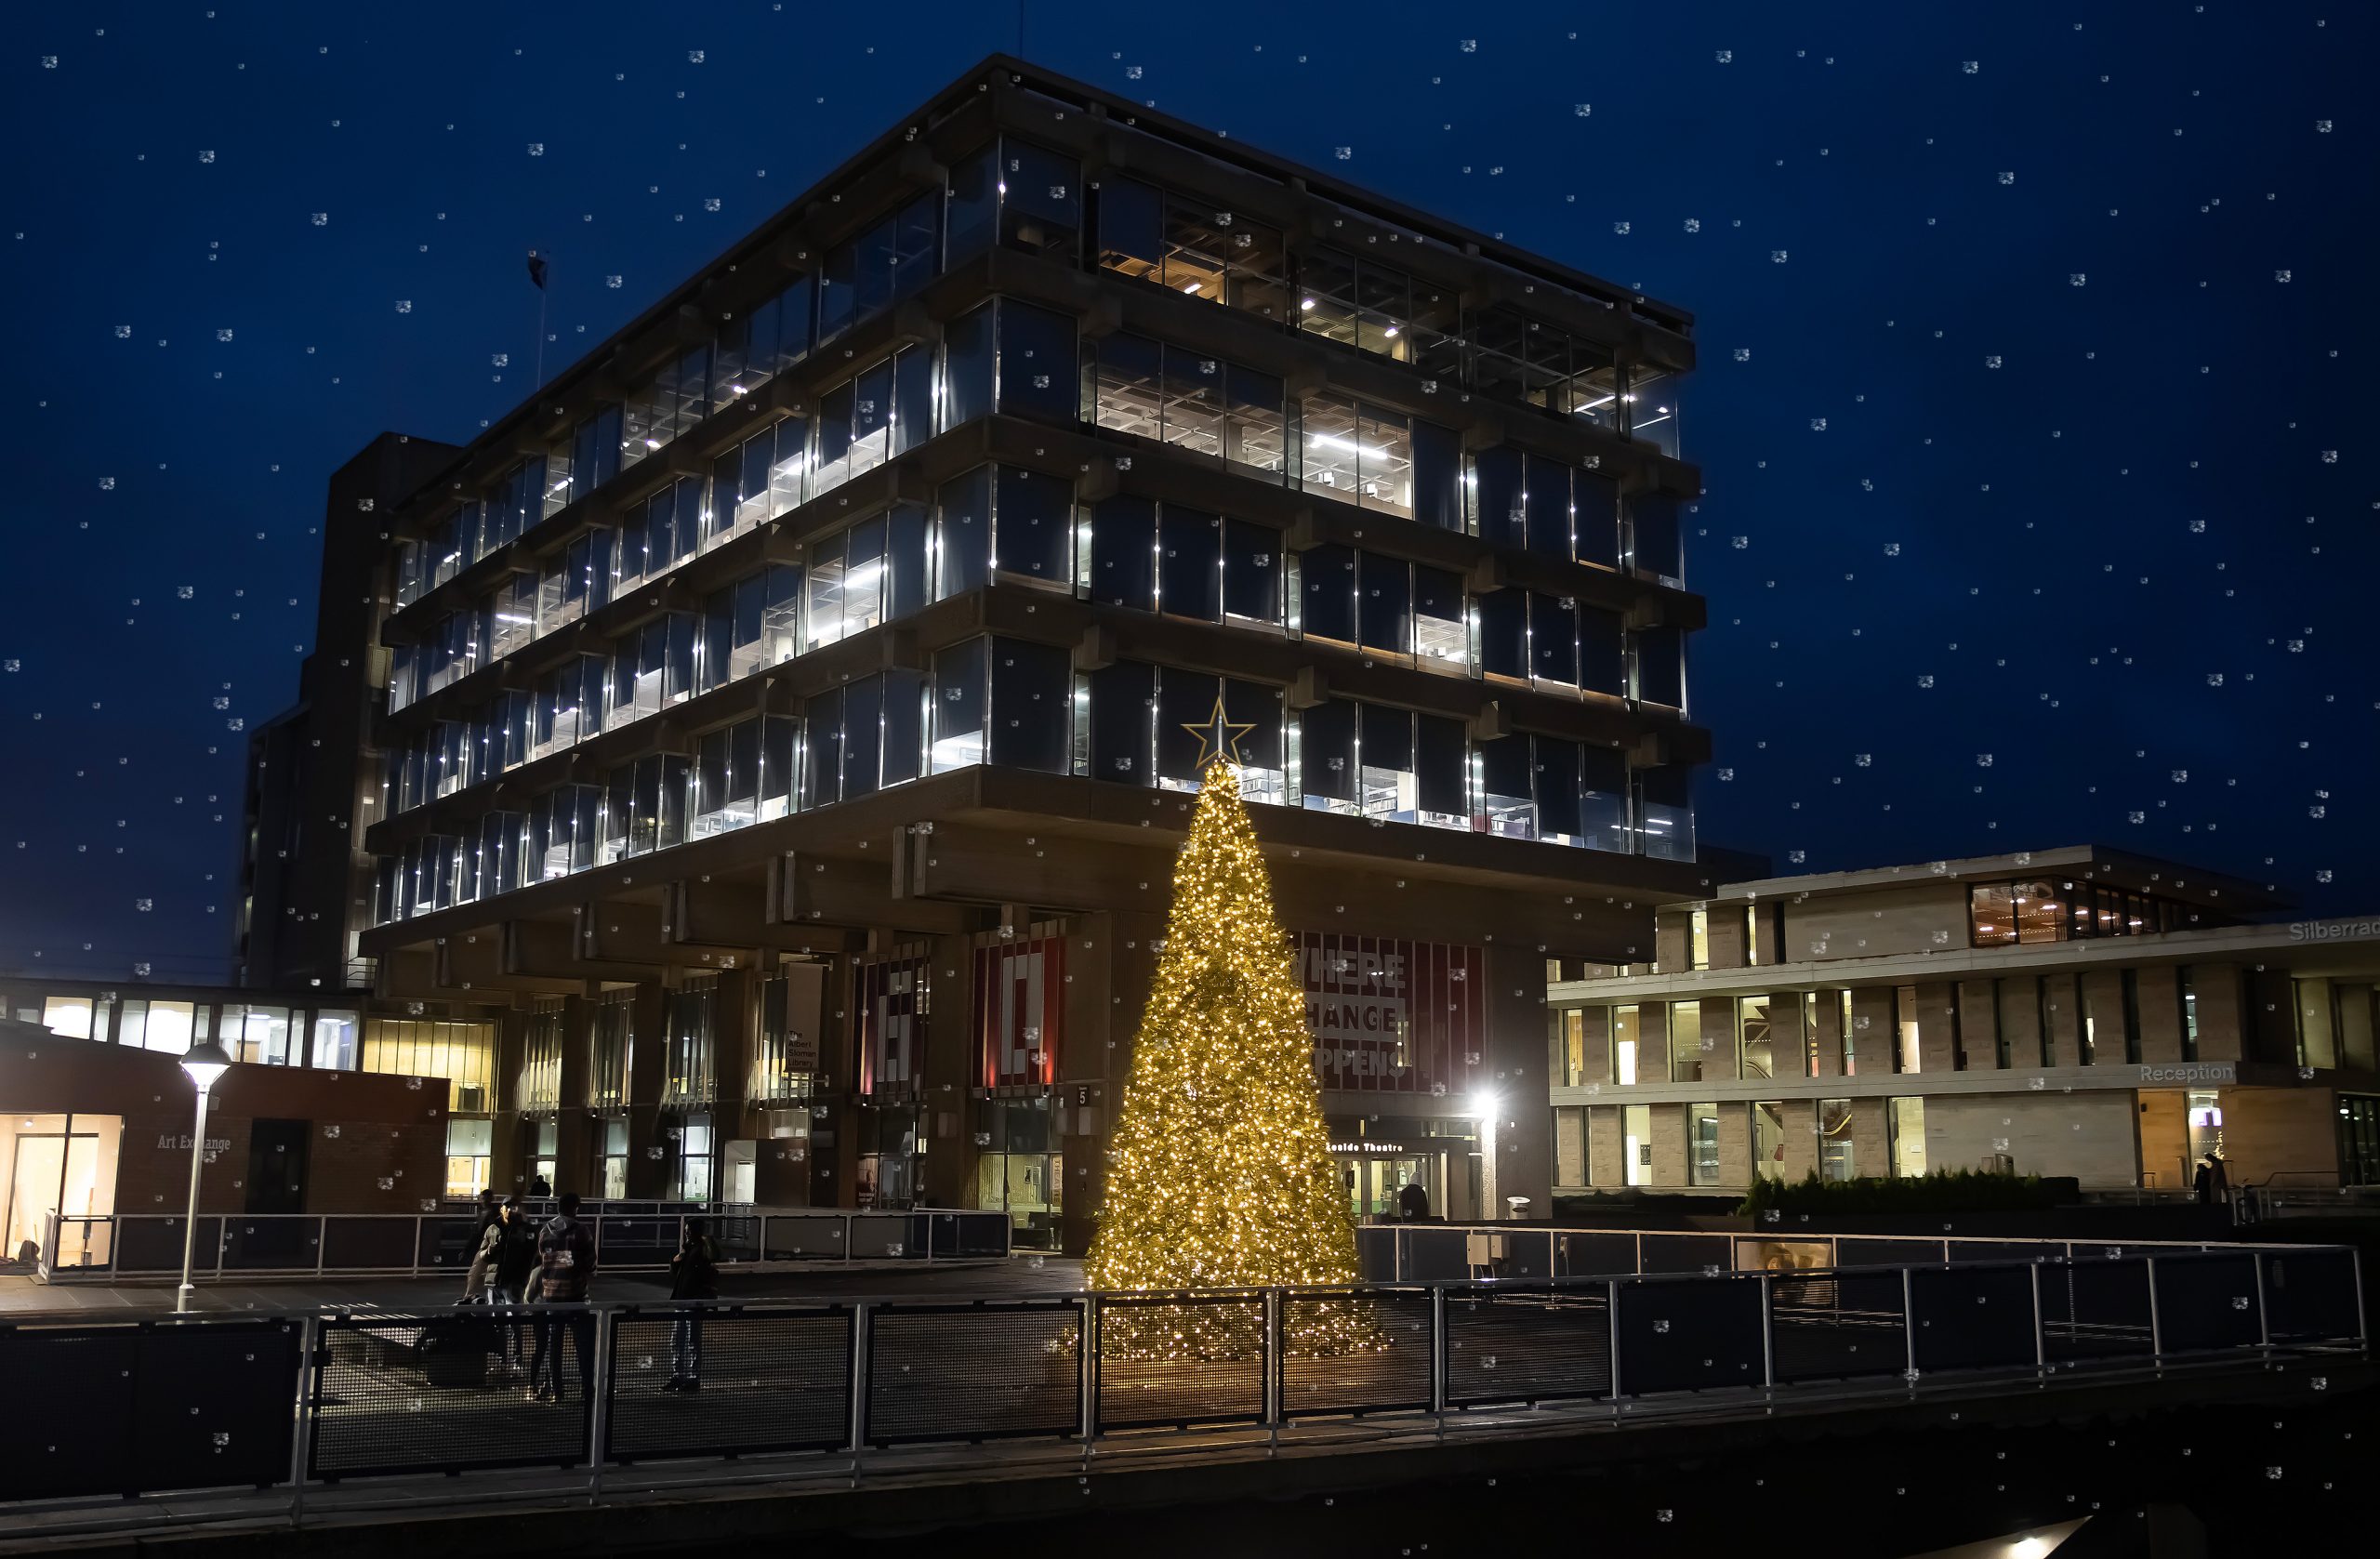 Snow falling lightly on the Albert Sloman Library with a christmas tree in front of it